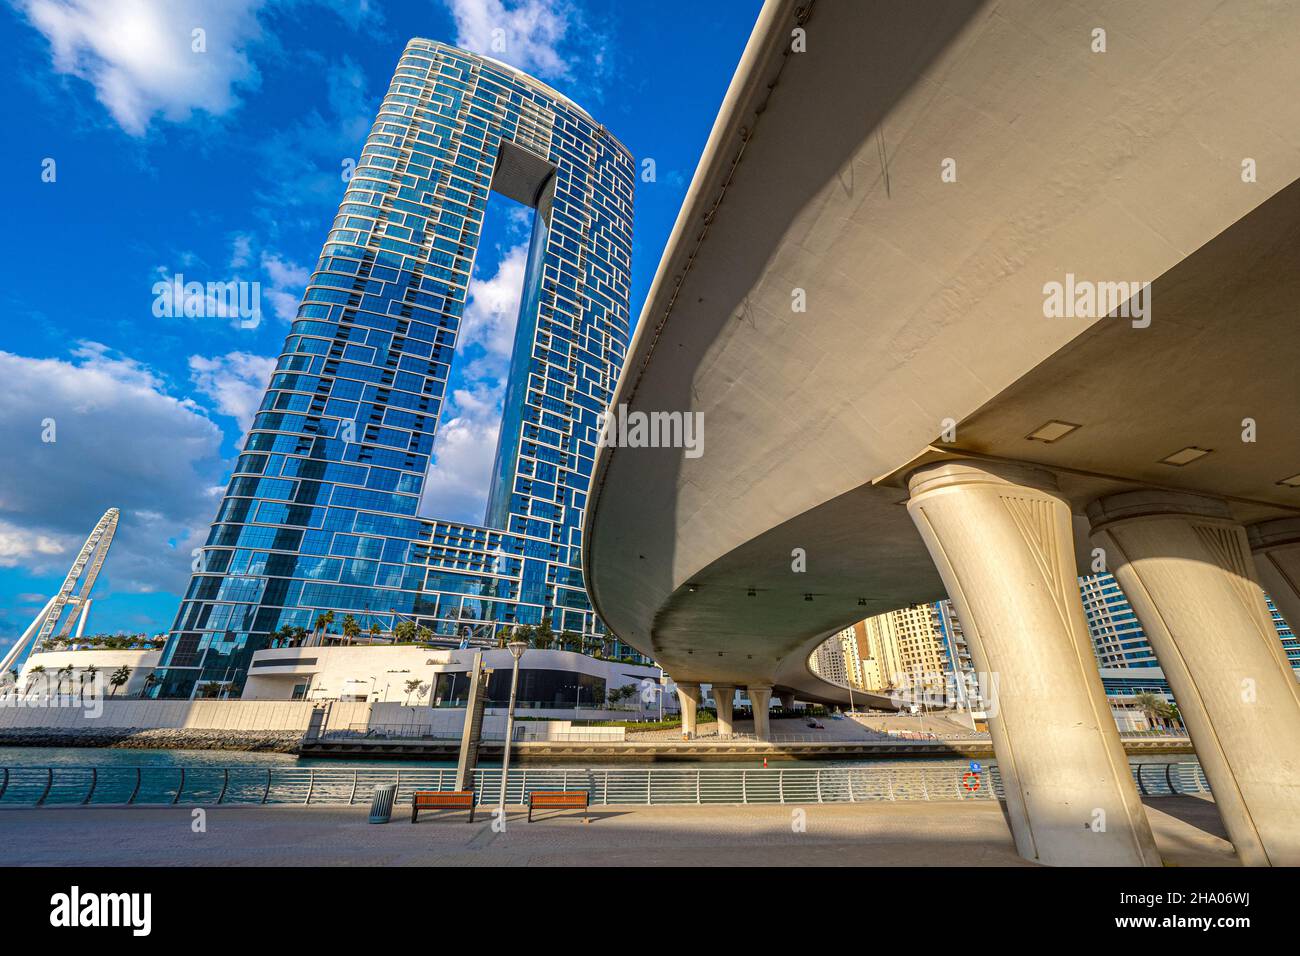 View of a modern hotel complex building raising at the end of the Dubai Marina district next to the waterway inlet and a highway bridge, Dubai, UAE Stock Photo